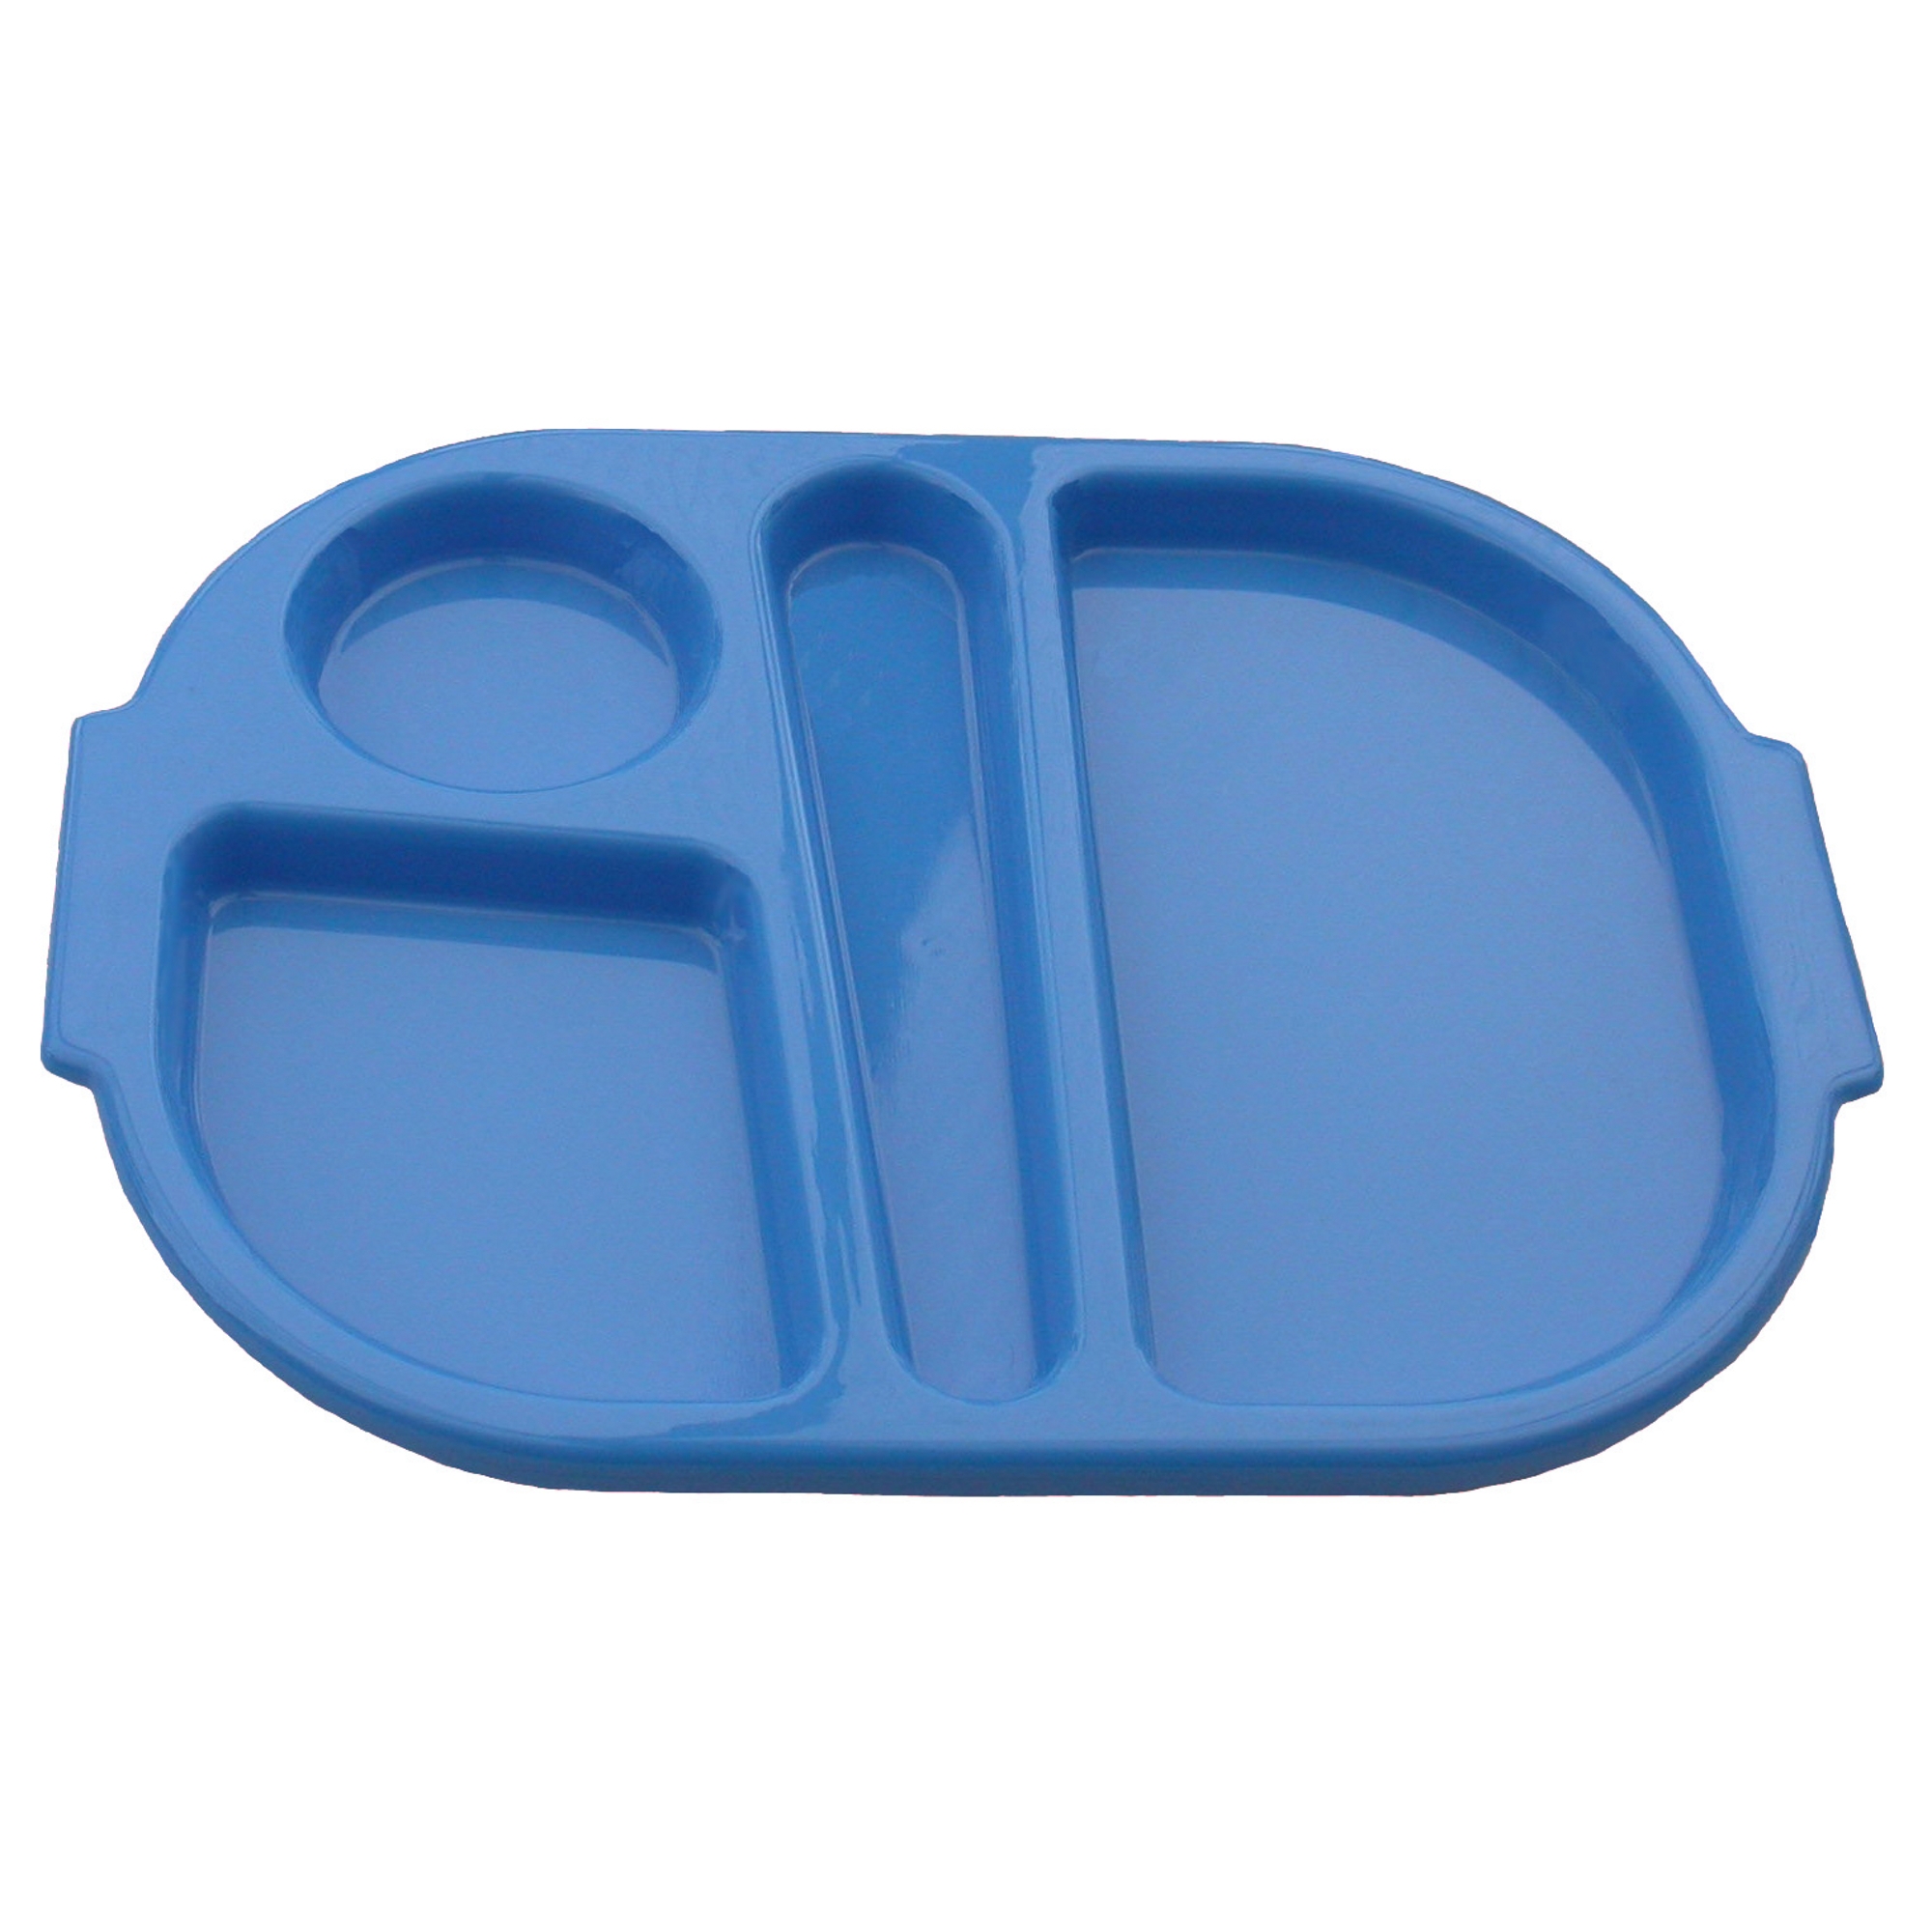 Meal Trays - Small - Blue